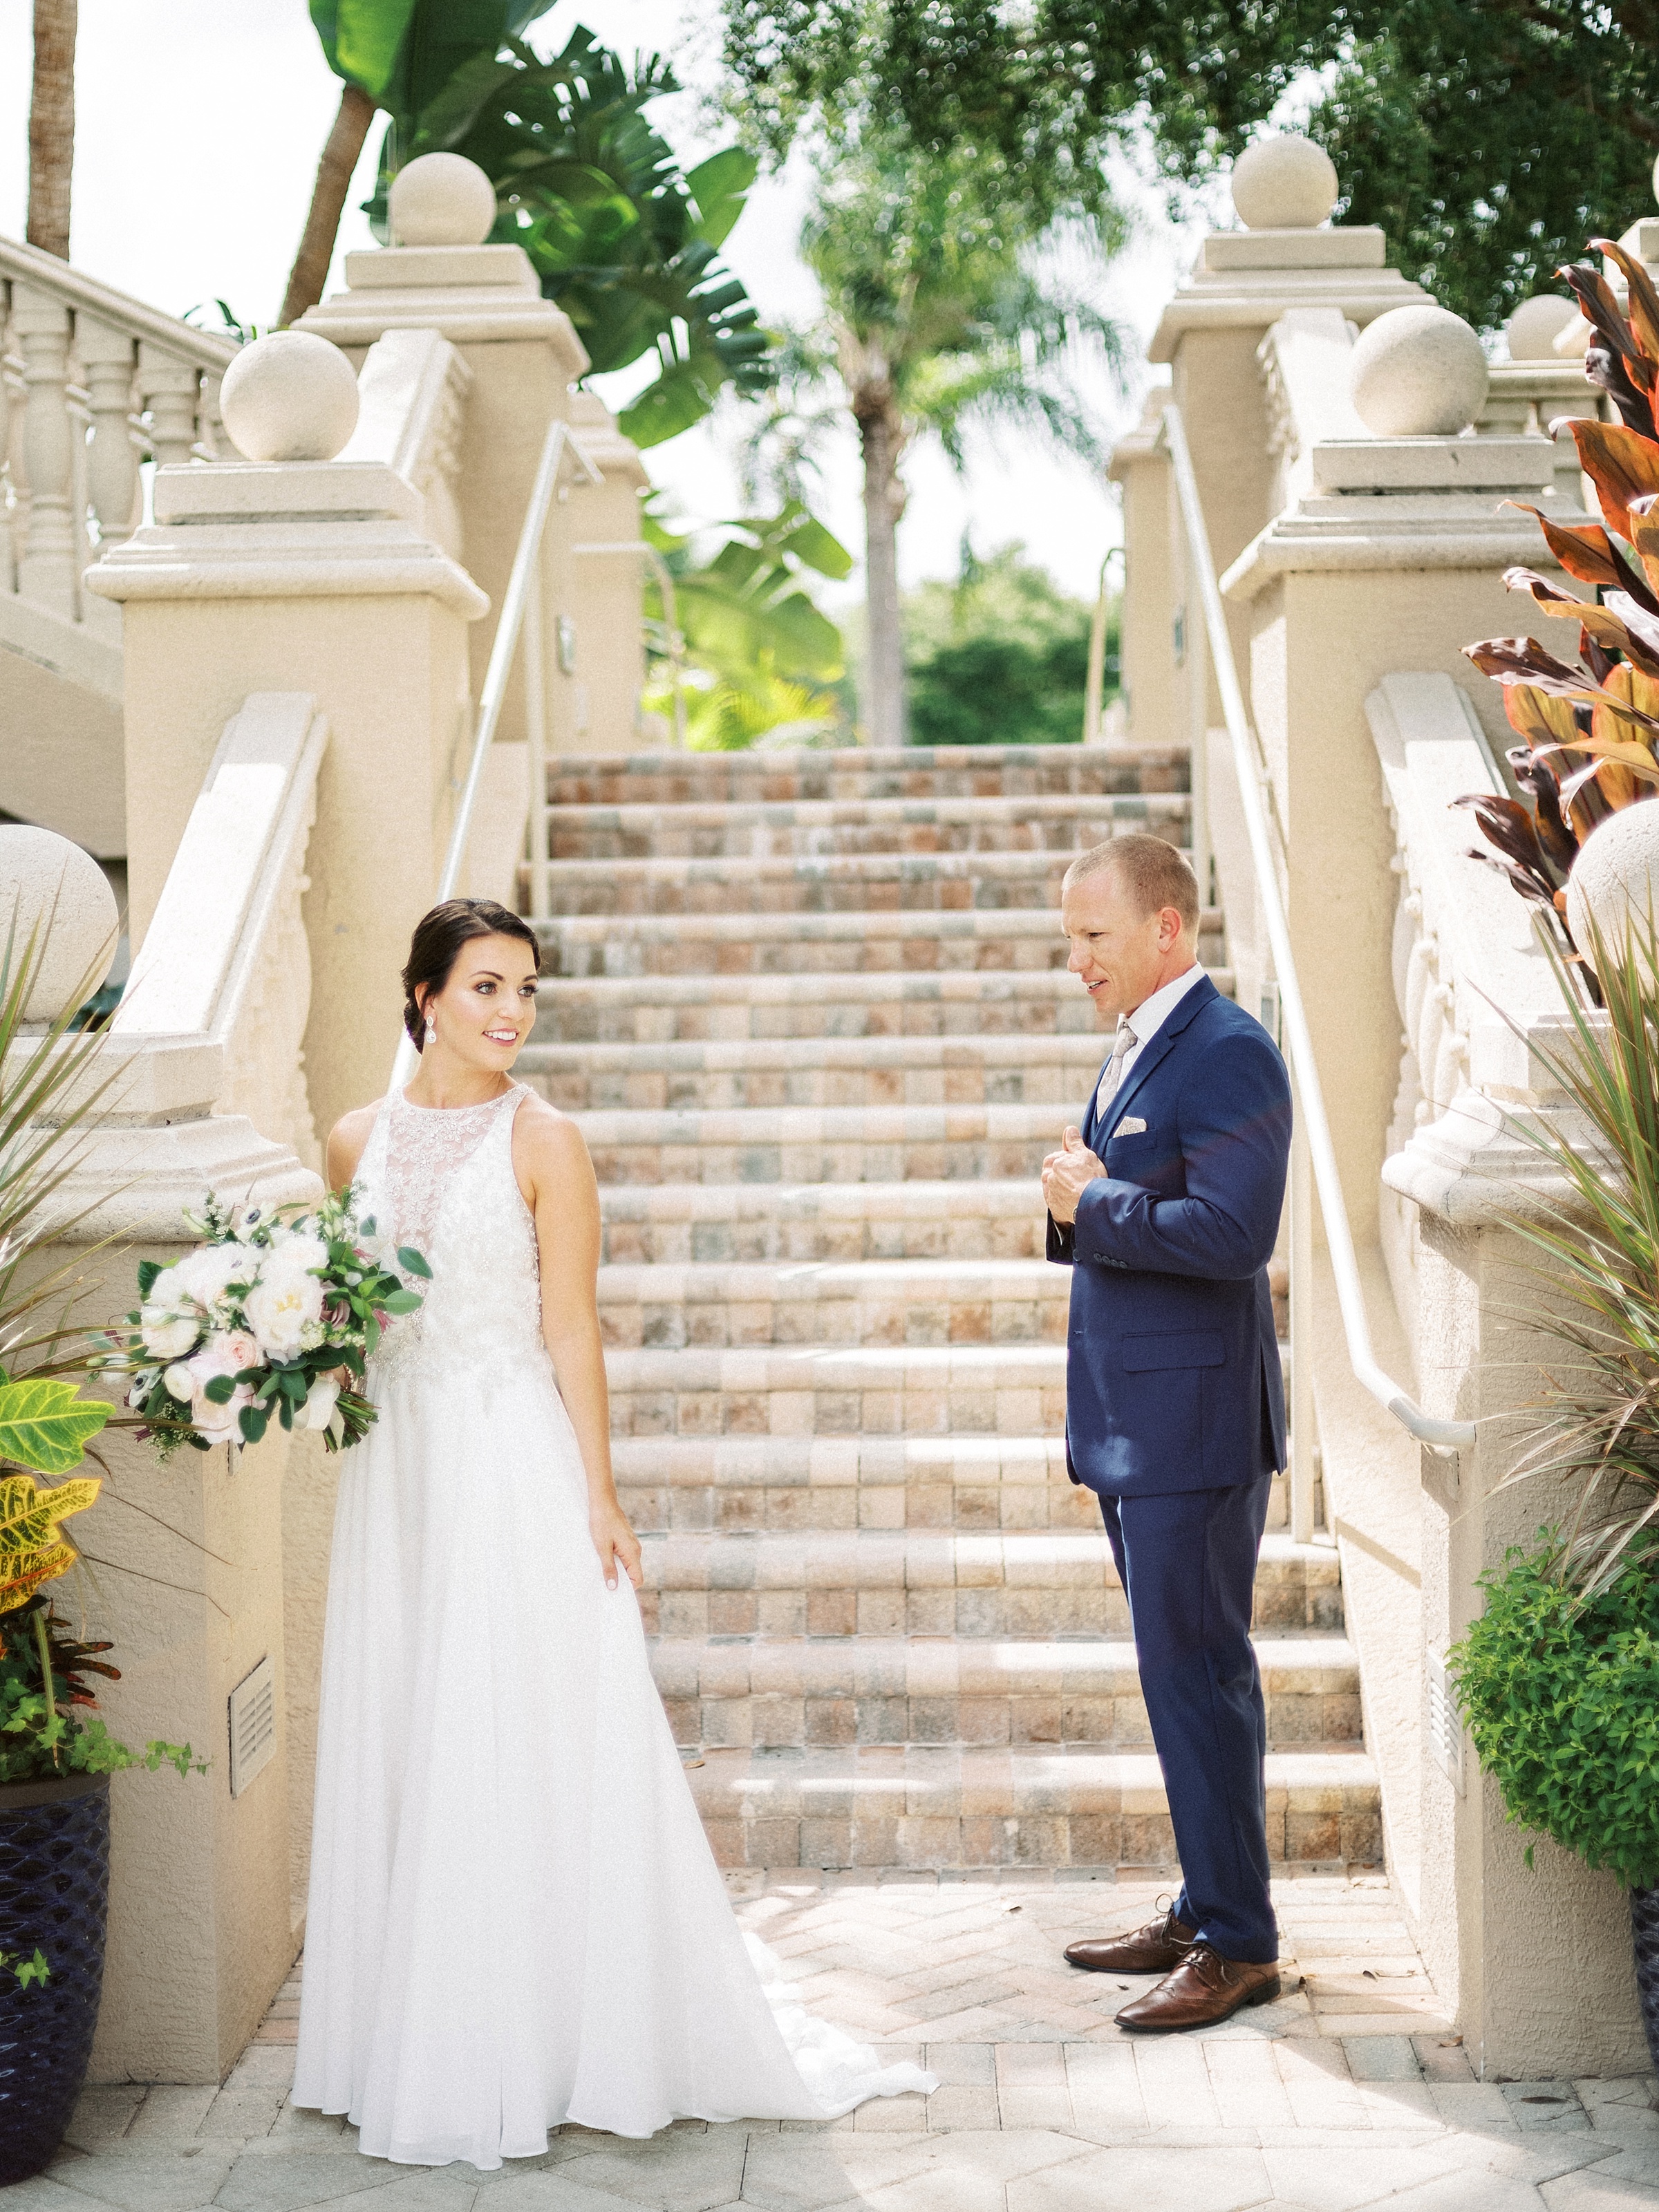 Club at the strand naples wedding, the strand naples wedding, naples wedding photographer, first look photo on stairs 